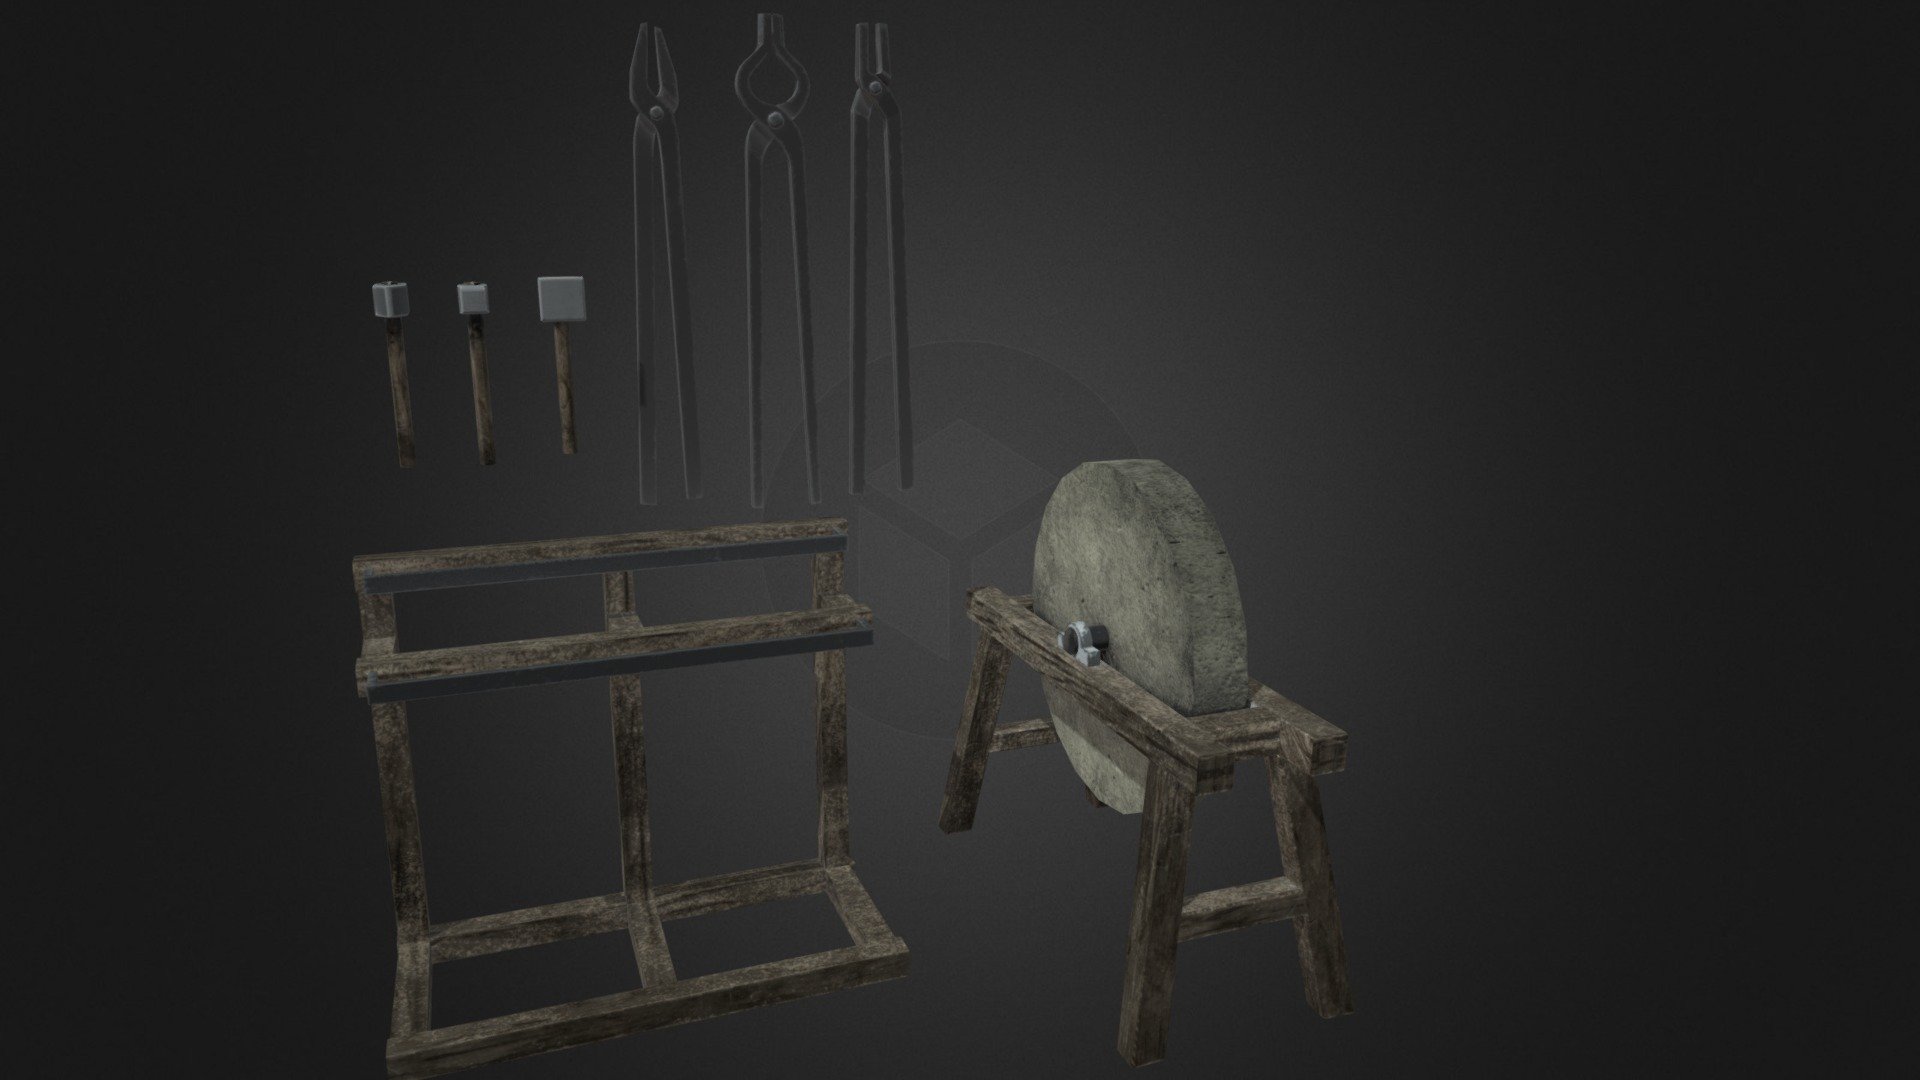 These assets were created for the Blacksmith Forge environment 3d model